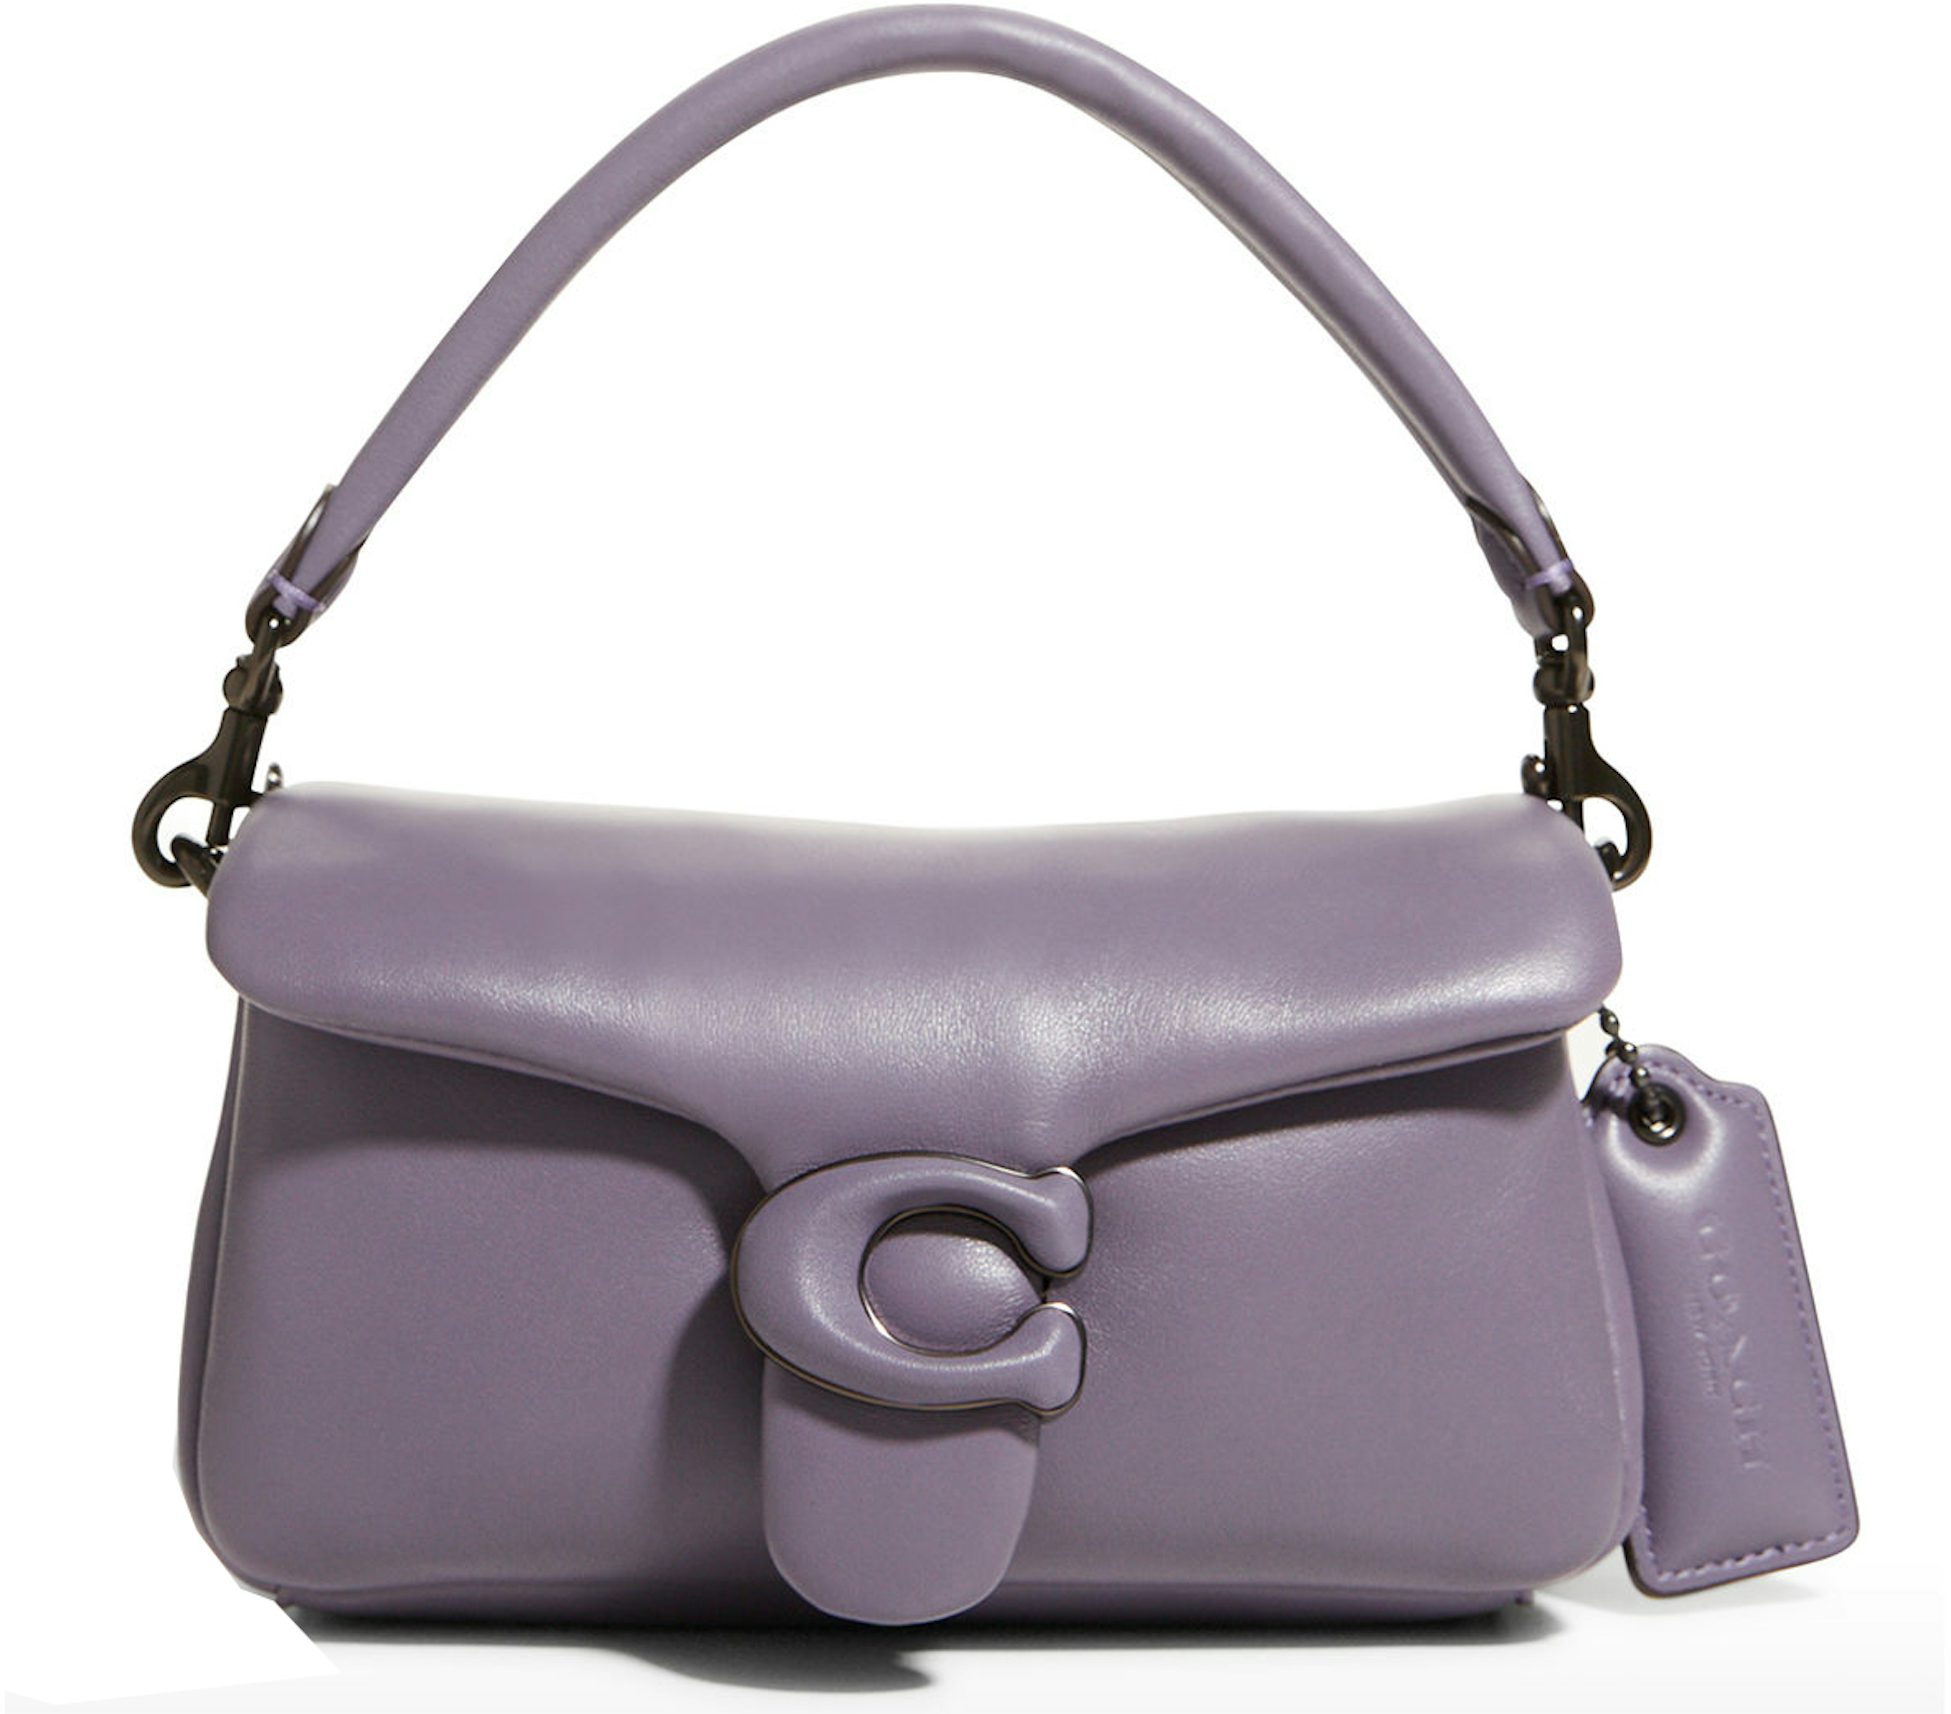 NWT Coach Pillow Tabby Shoulder Bag 18 Nappa Leather Ice Purple